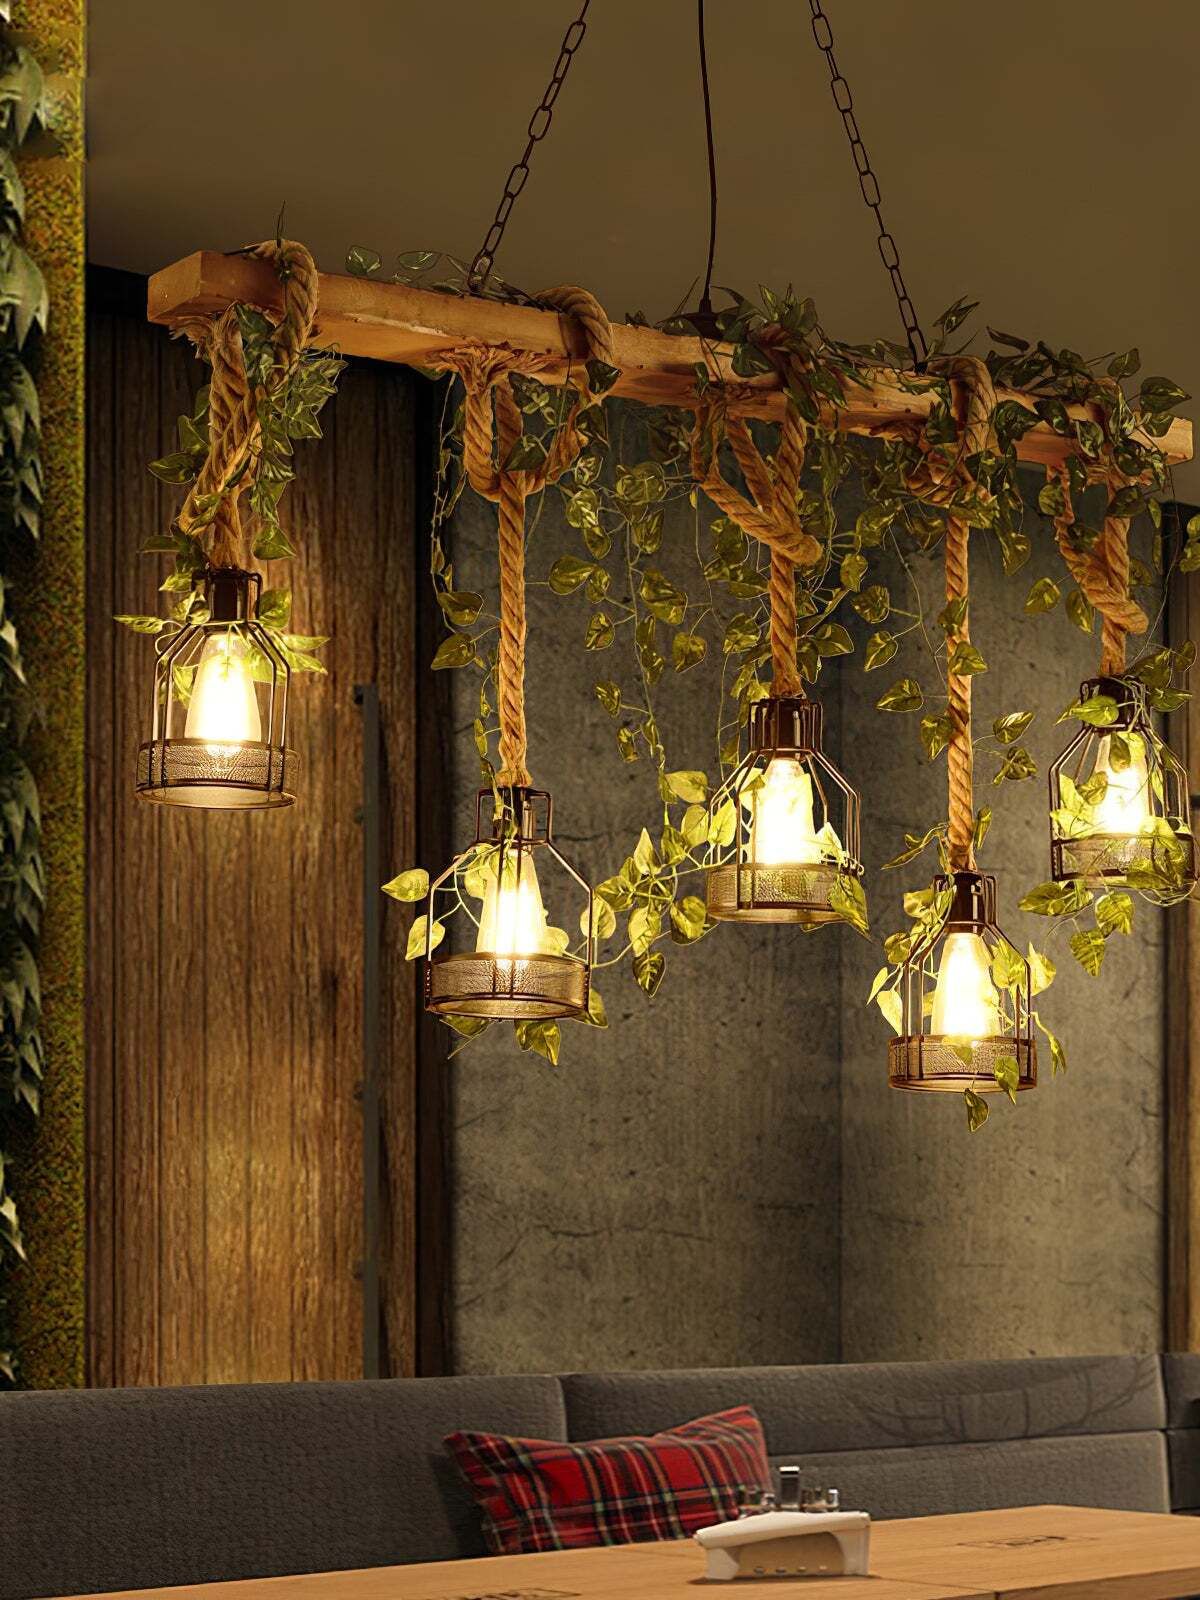 Beautiful Wooden Dining Room Chandeliers for a Rustic Touch